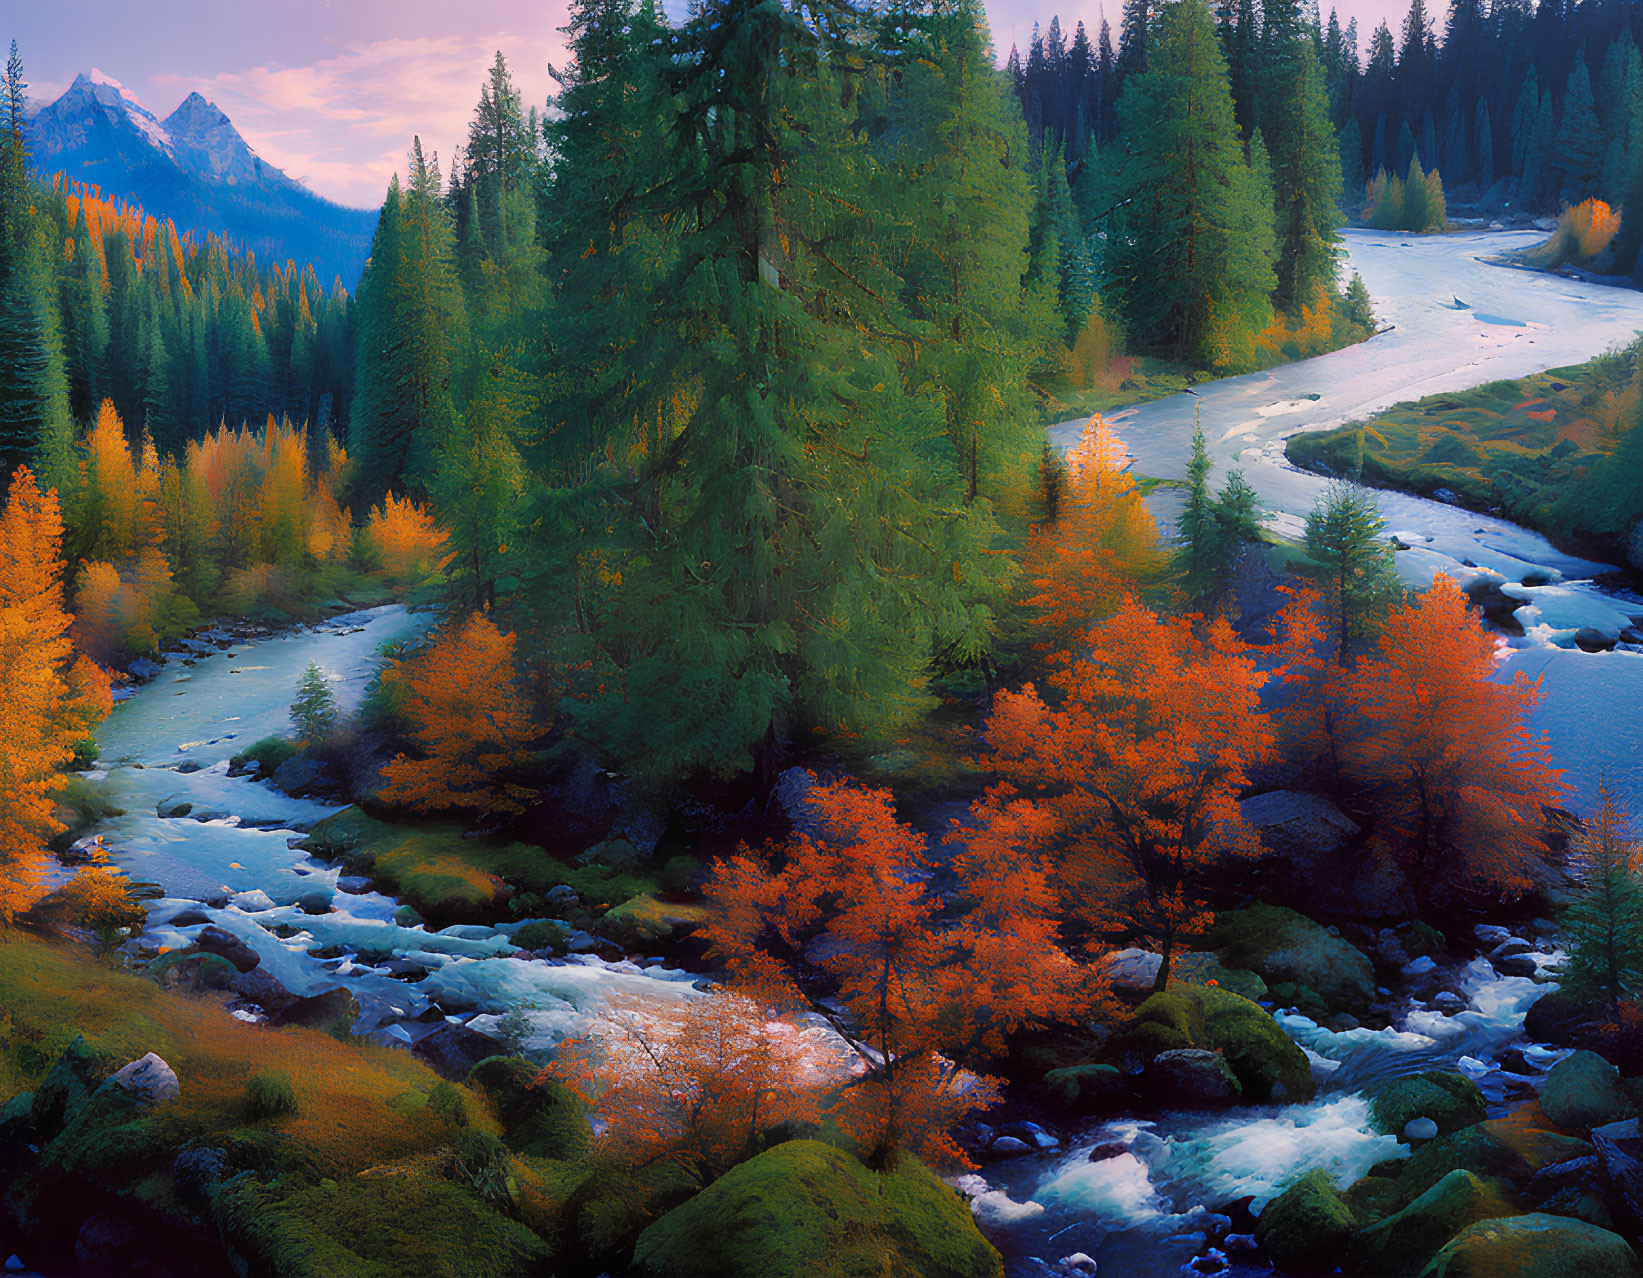 Scenic autumn river with misty mountains